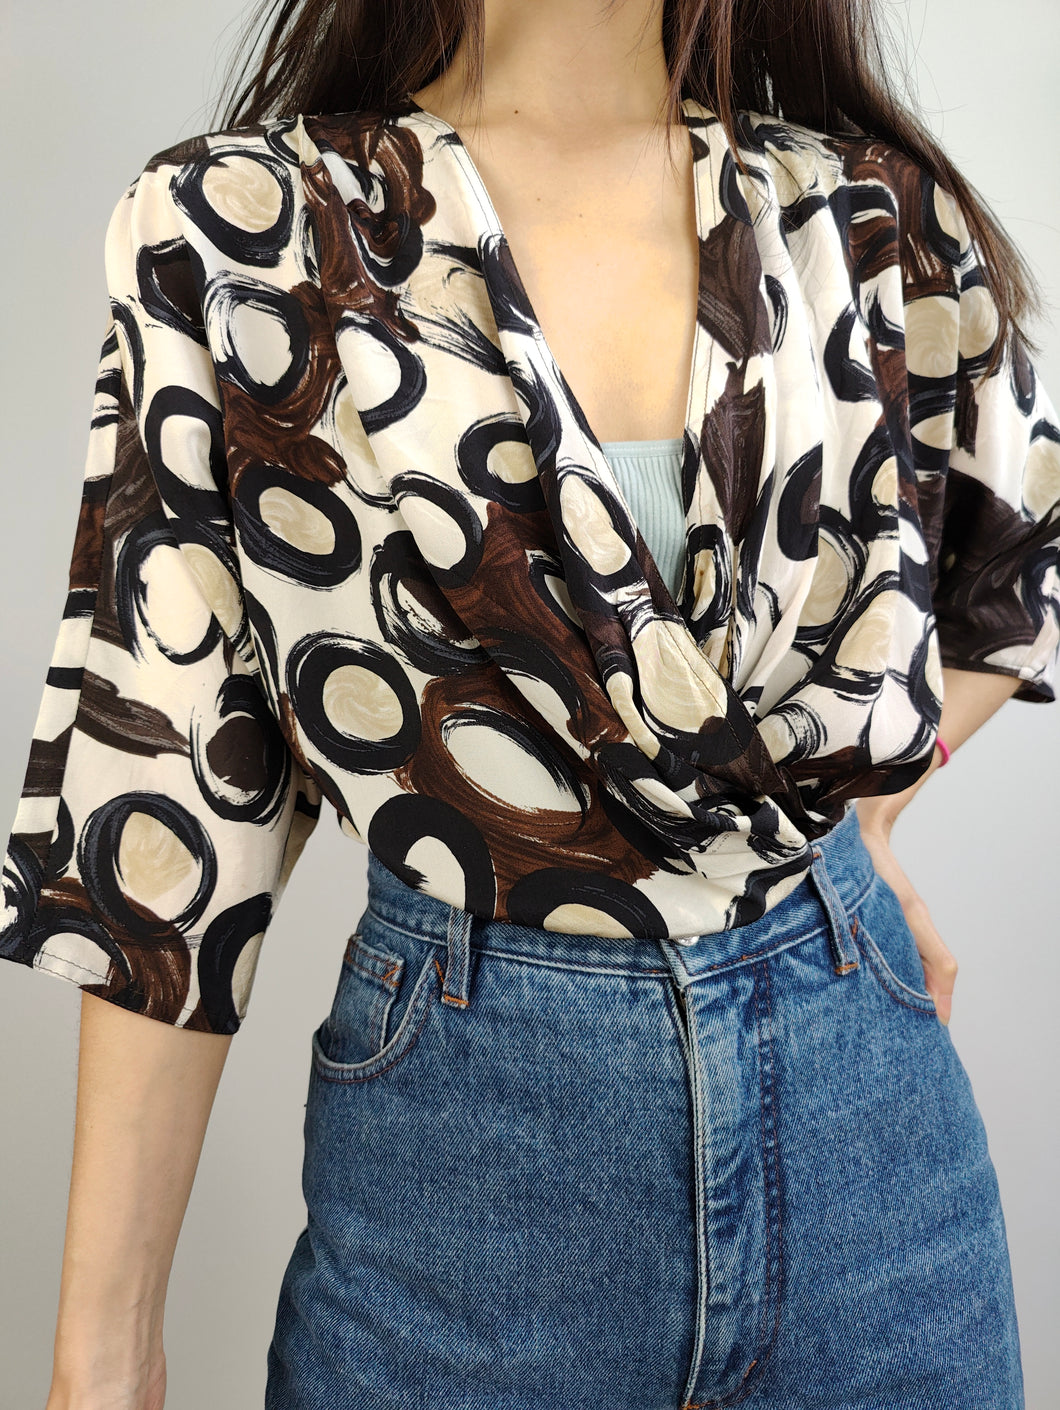 The Brown Cream Coffee Pattern Blouse | Vintage Marino Rinaldi made in Italy wrap print short sleeve women top M